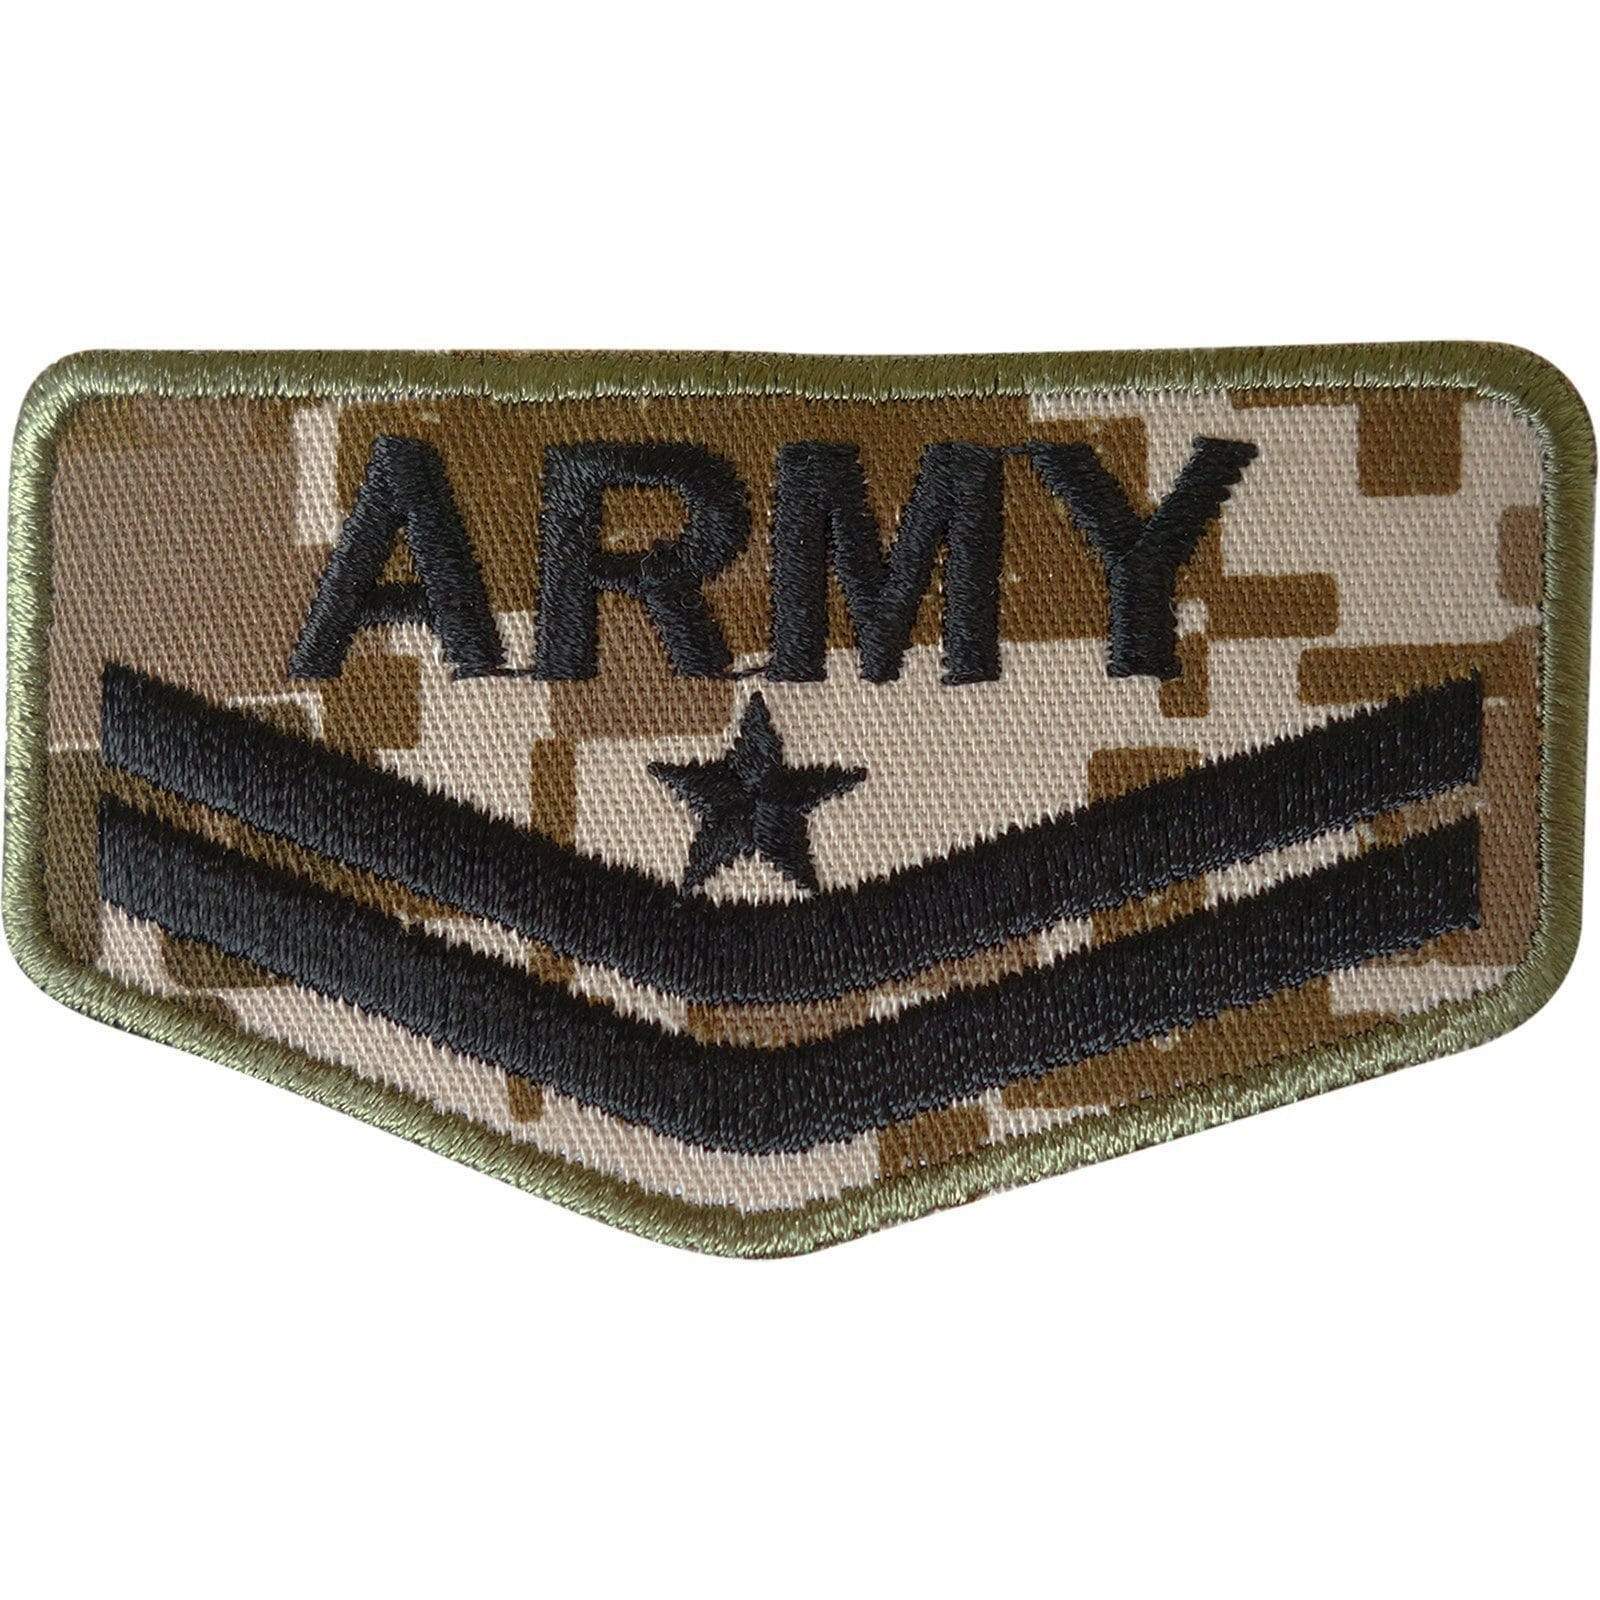 Army Patch Embroidered Badge Iron Sew On Bag Soldier Uniform Fancy Dress Costume